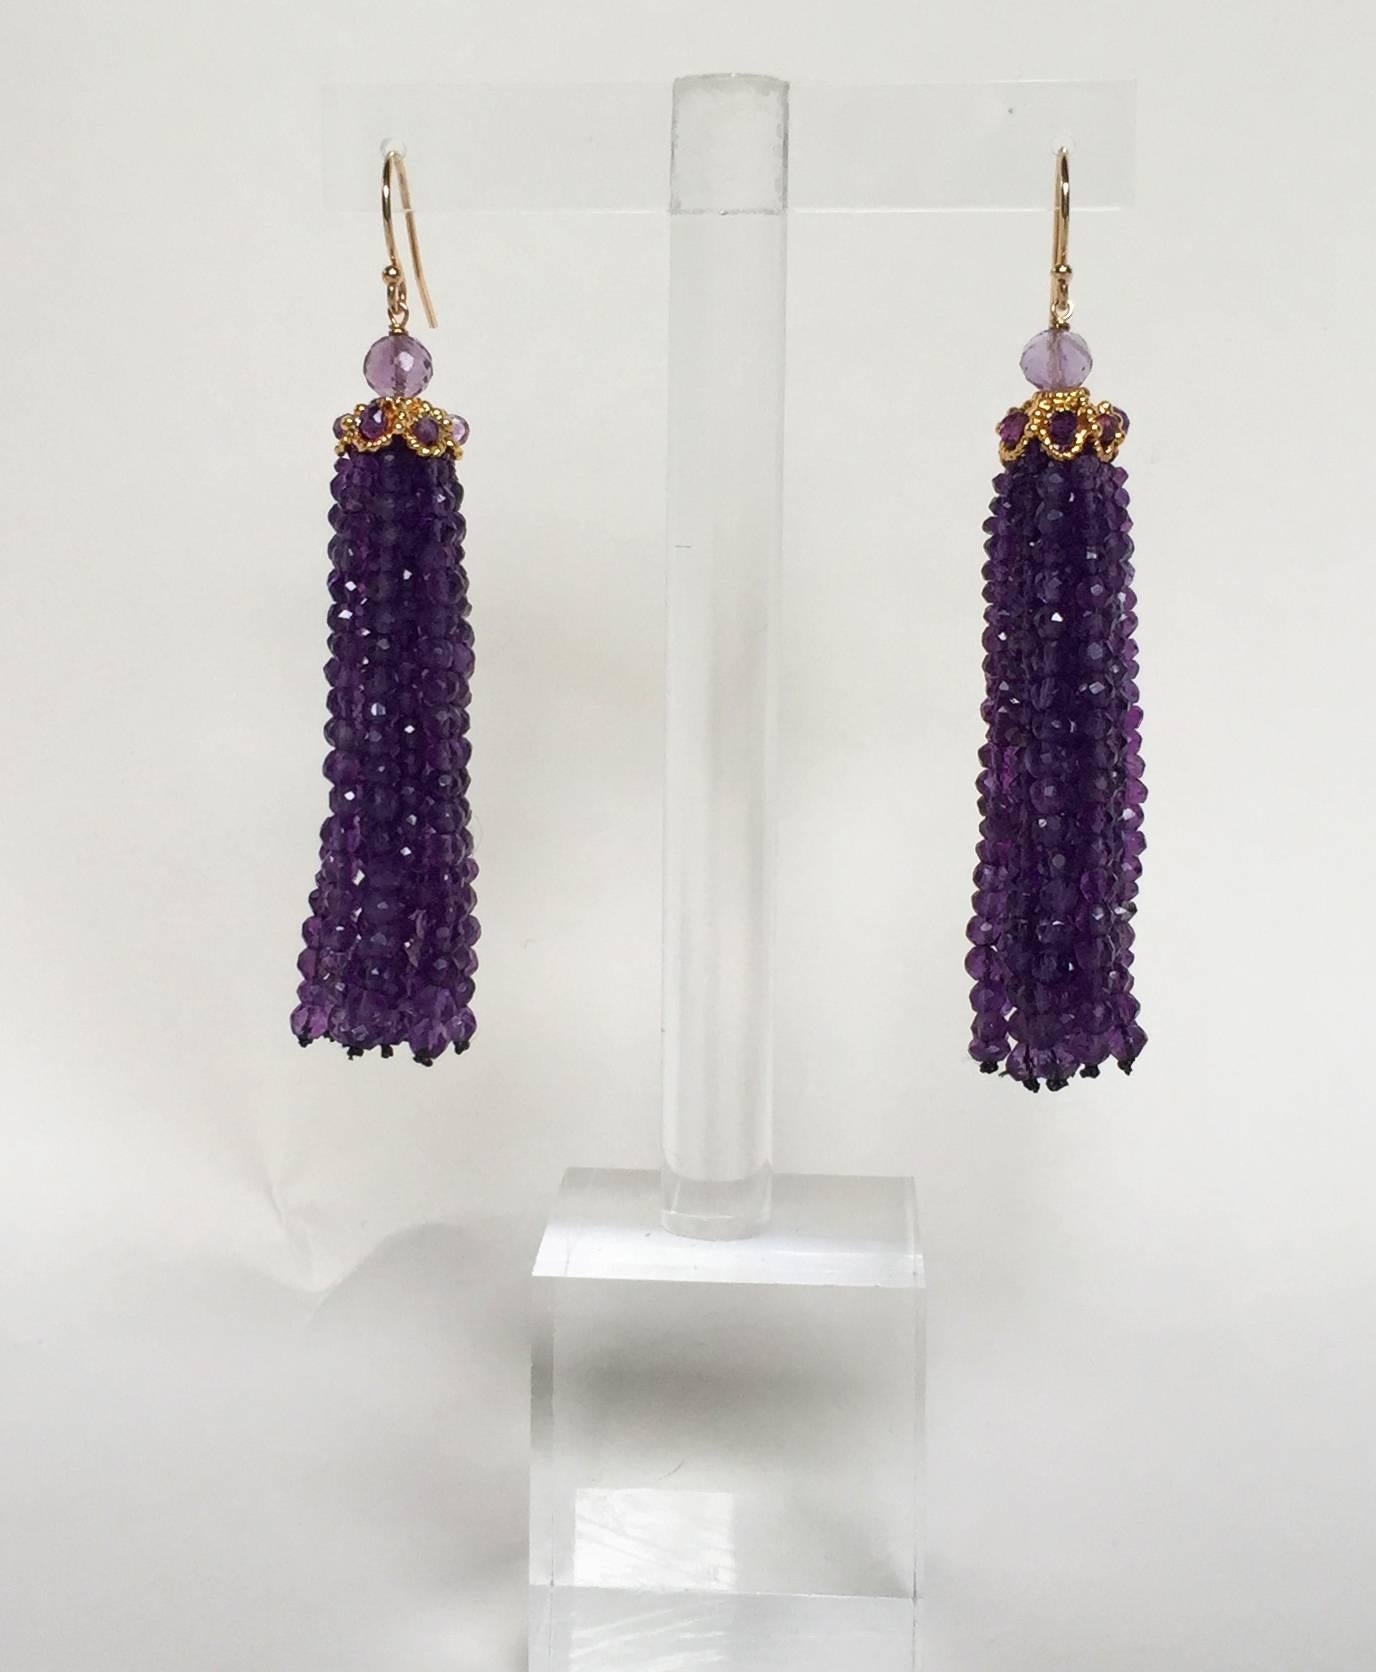 These unique earrings are composed with the finest 2.5 mm faceted dark Amethyst beads stranded to tassels. The tassels flow out of a 14 K yellow gold plated cup,encrusted with Amethyst beads connected to a fine 14 k yellow gold earrings.
Contrasting